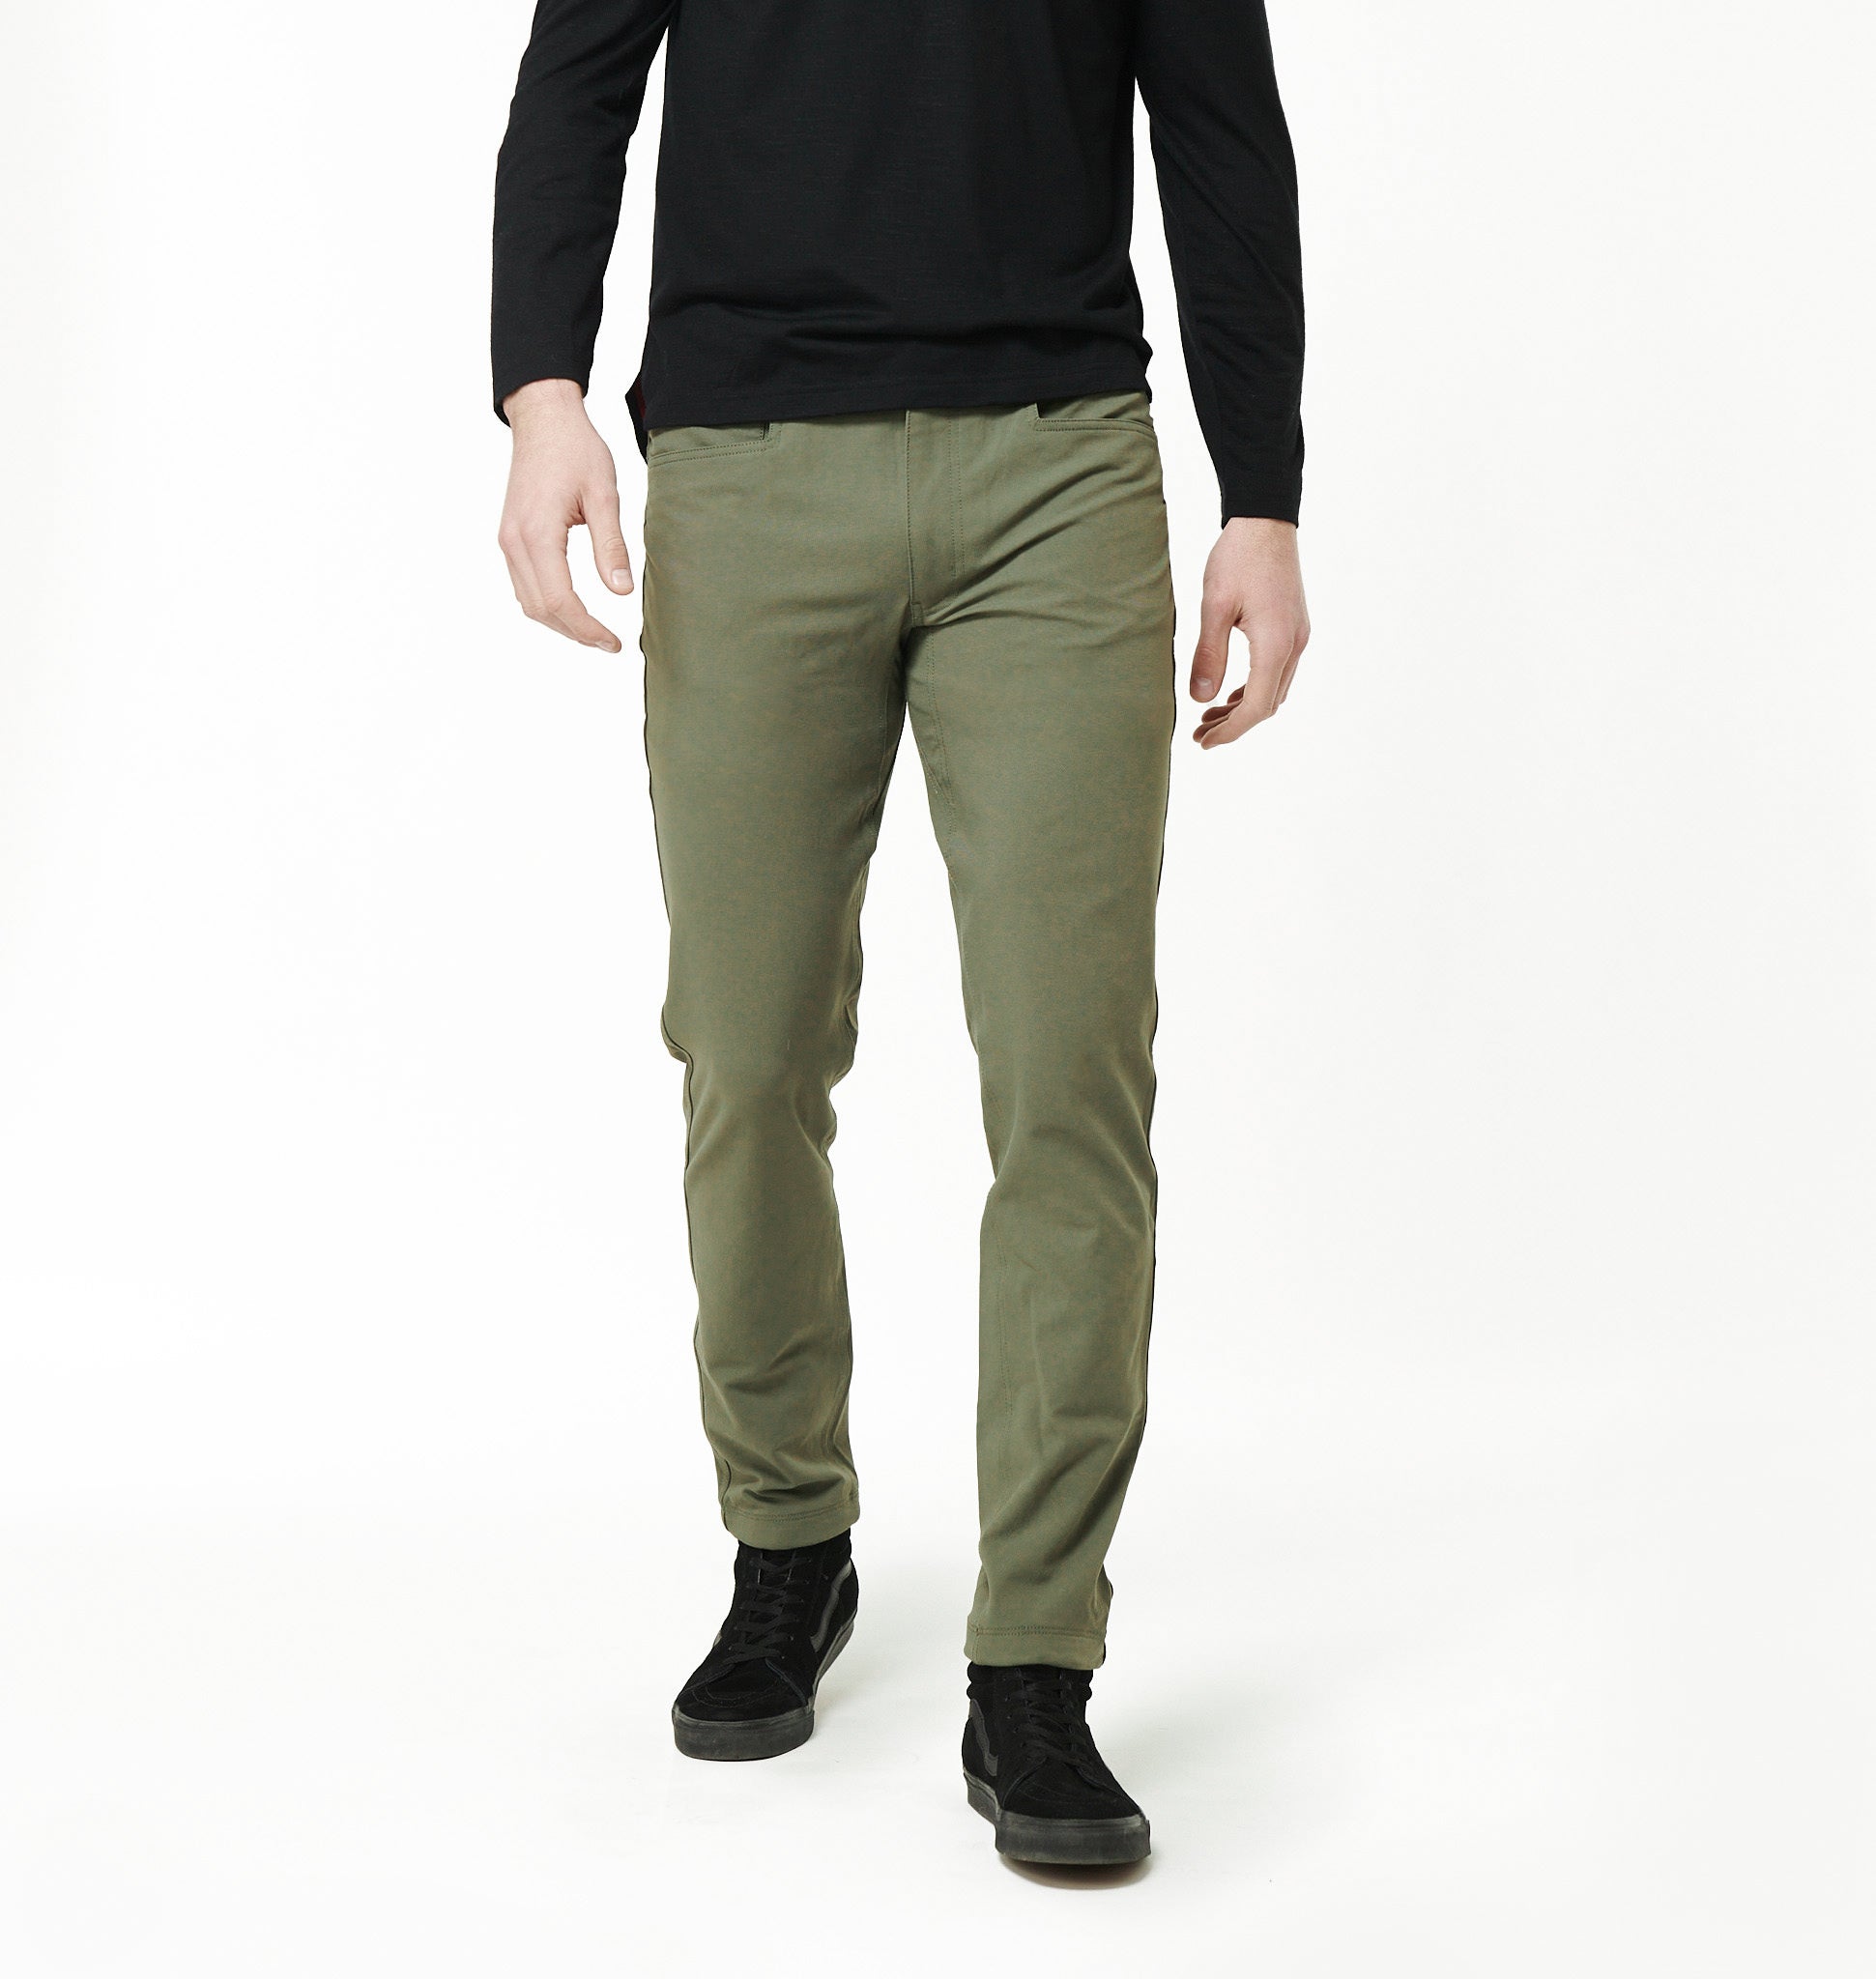 H&W: Tom is 6’ / 170 Lbs. wearing size 32#color_olive